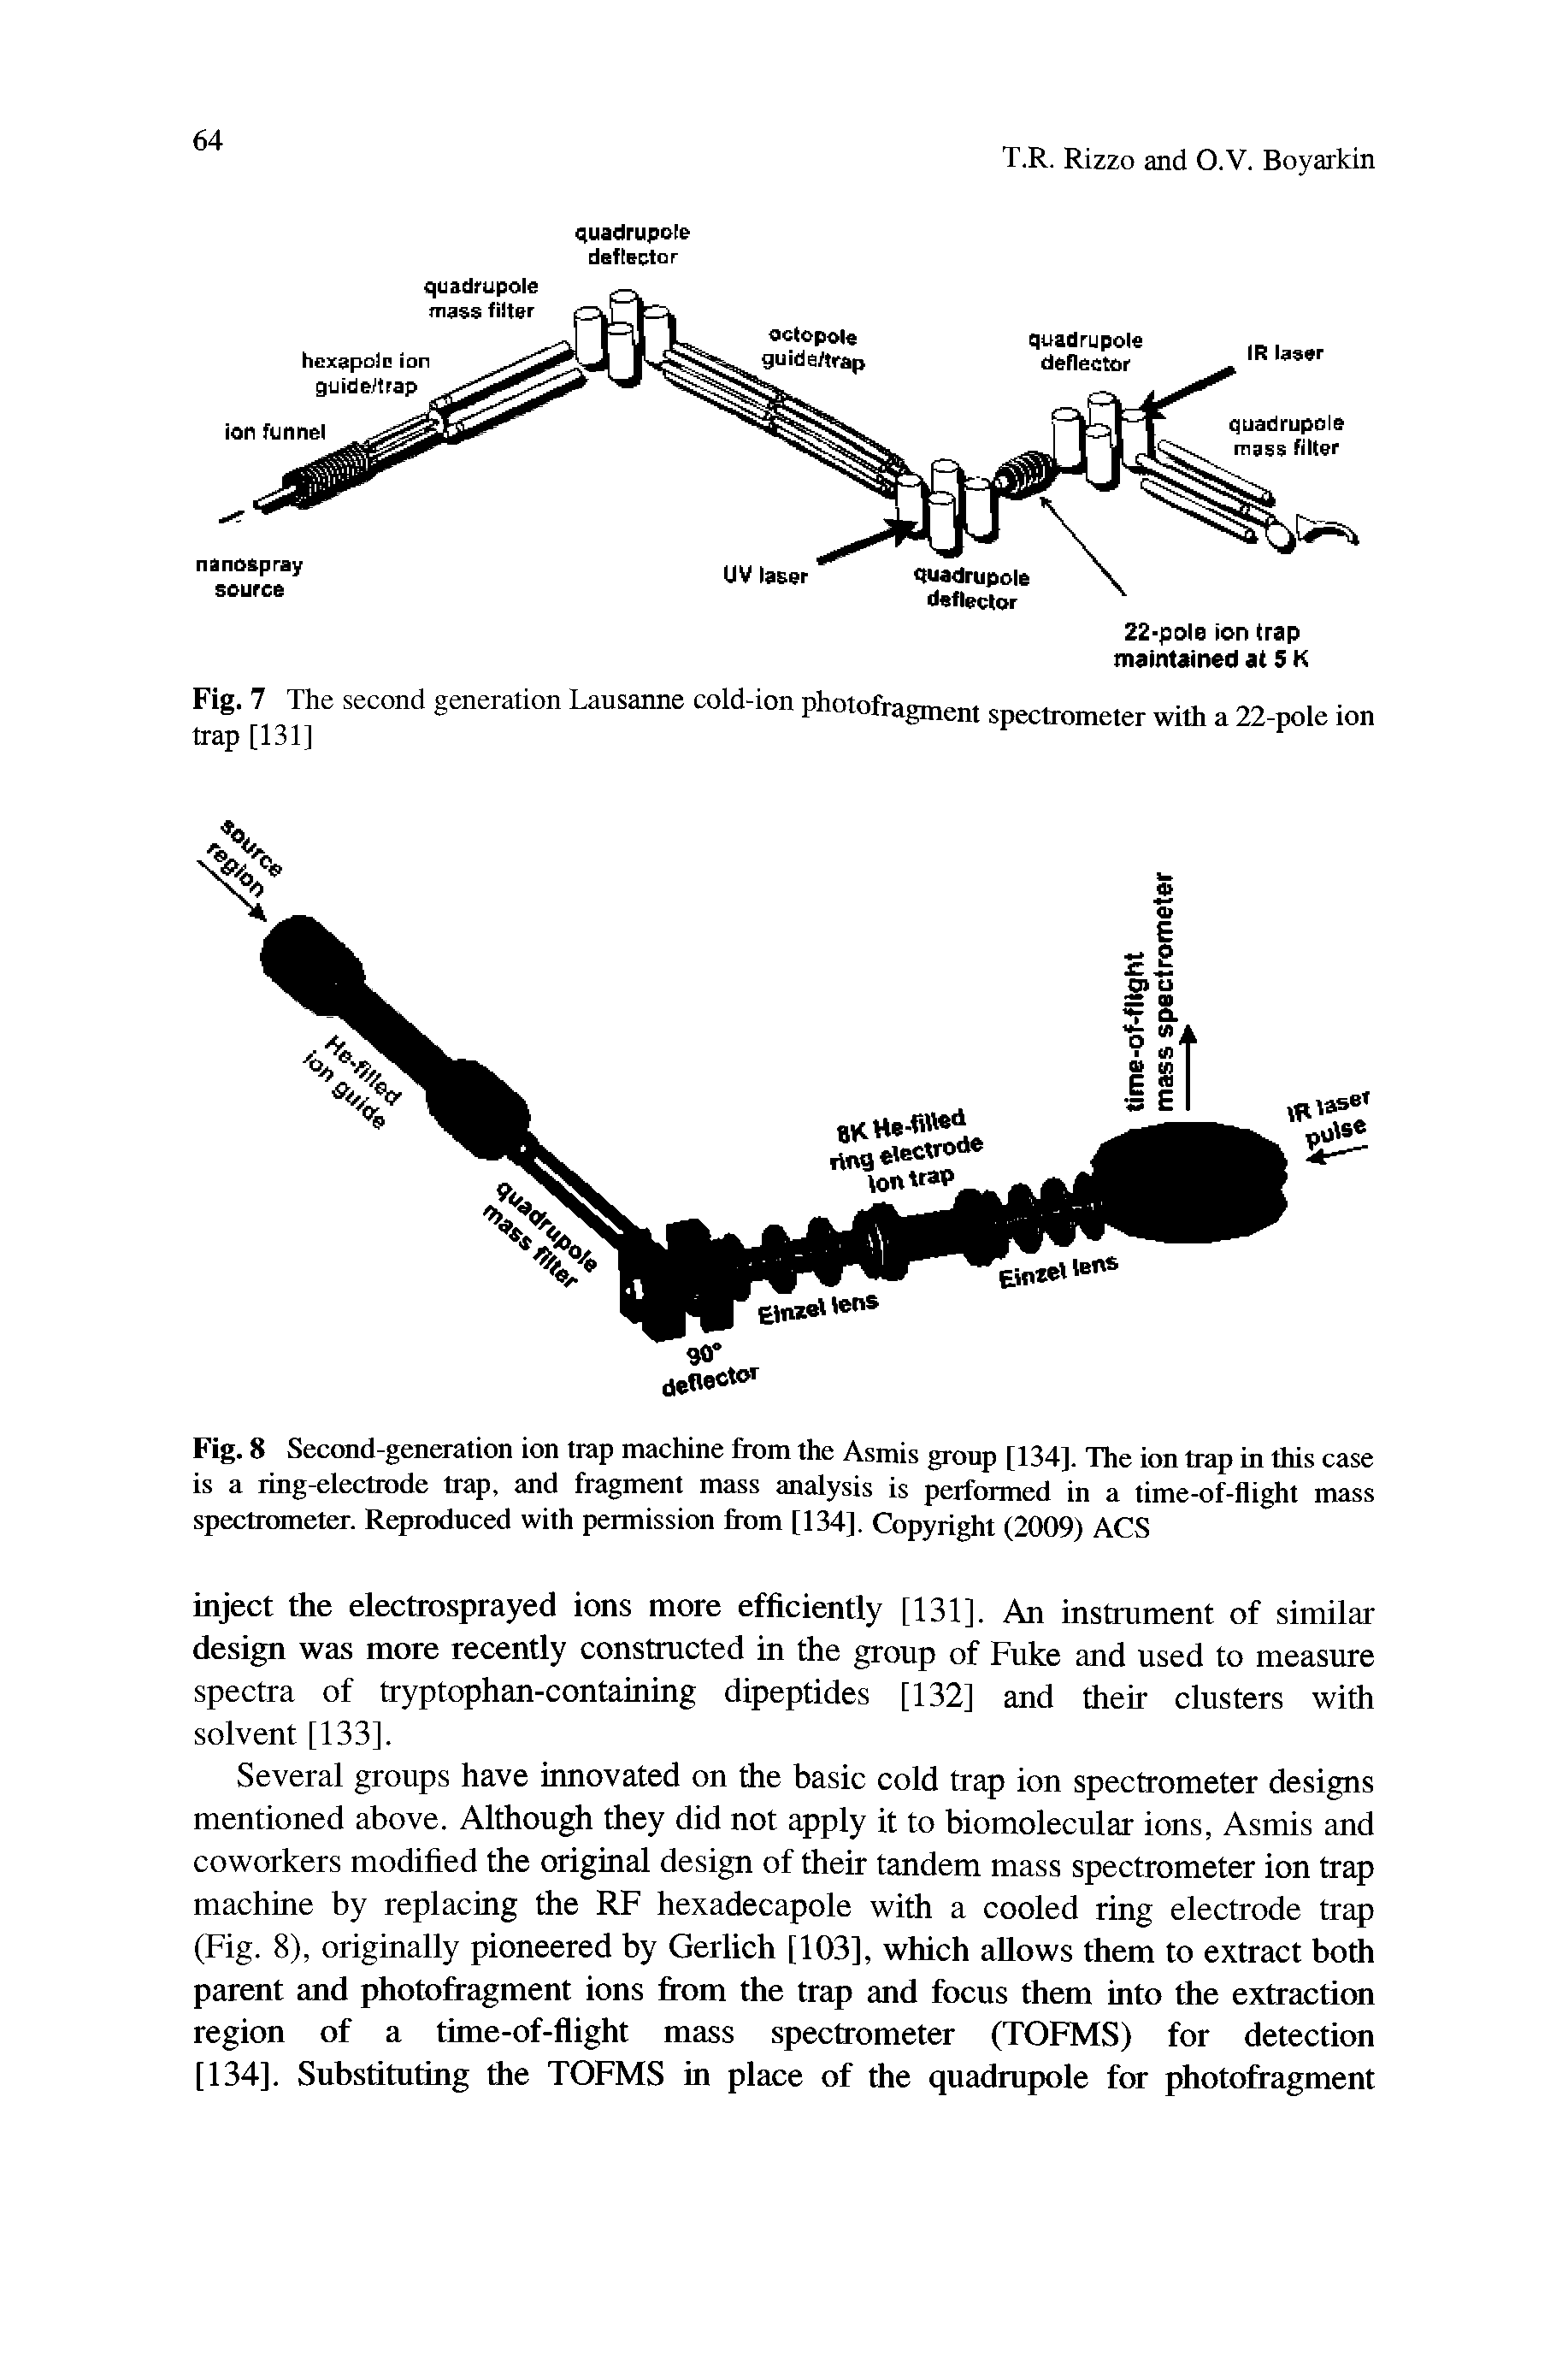 Fig. 8 Second-generation ion trap machine from the Asmis group [134]. The ion trap in this case is a ring-electrode trap, and fragment mass analysis is performed in a time-of-ilight mass spectrinneler. Reproduced with permission from [134]. Copyright (2009) ACS...